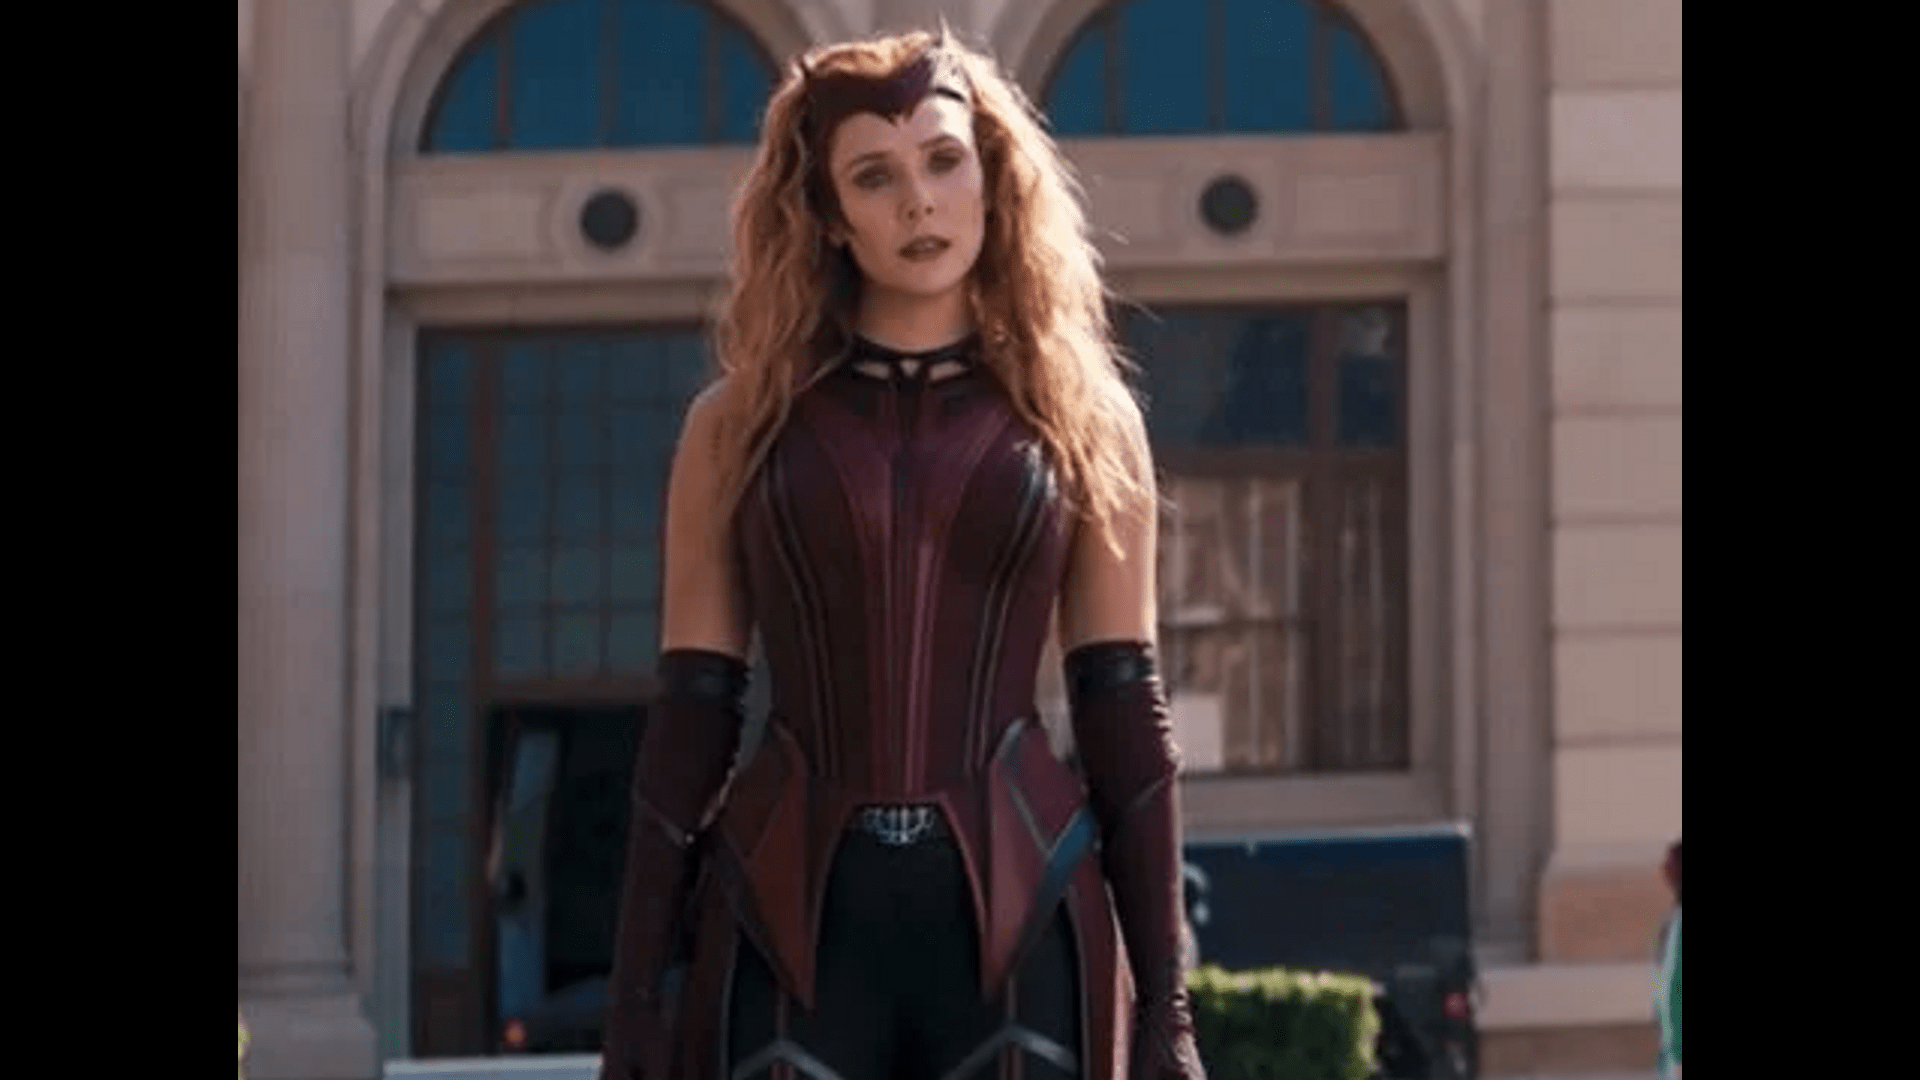 MCU STAR ELIZABETH OLSEN said that playing the hero is not attractive